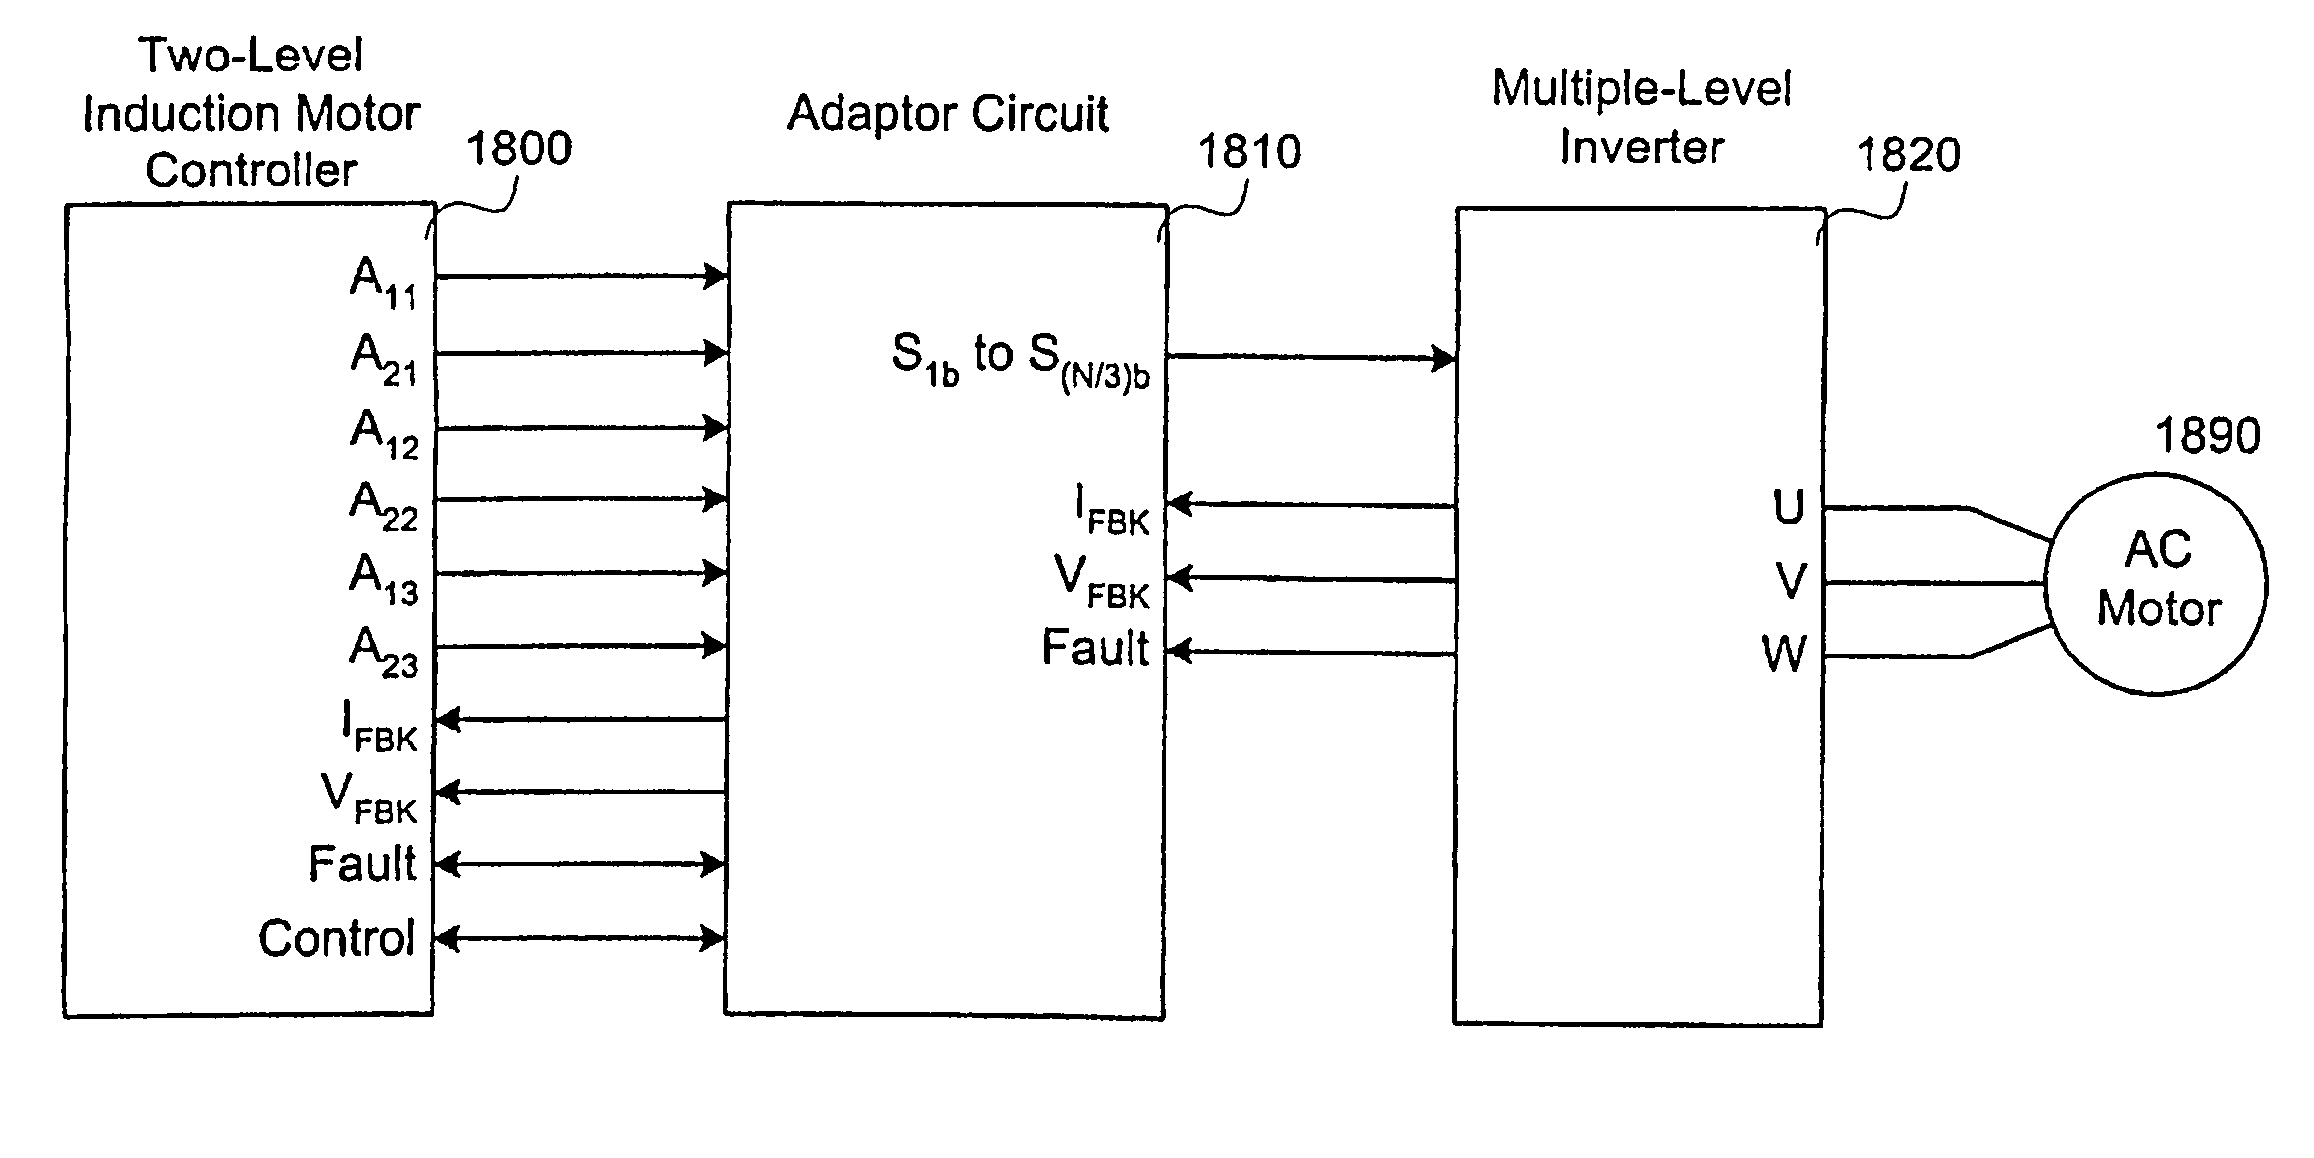 Low voltage, two-level, six-pulse induction motor controller driving a medium-to-high voltage, three-or-more-level AC drive inverter bridge